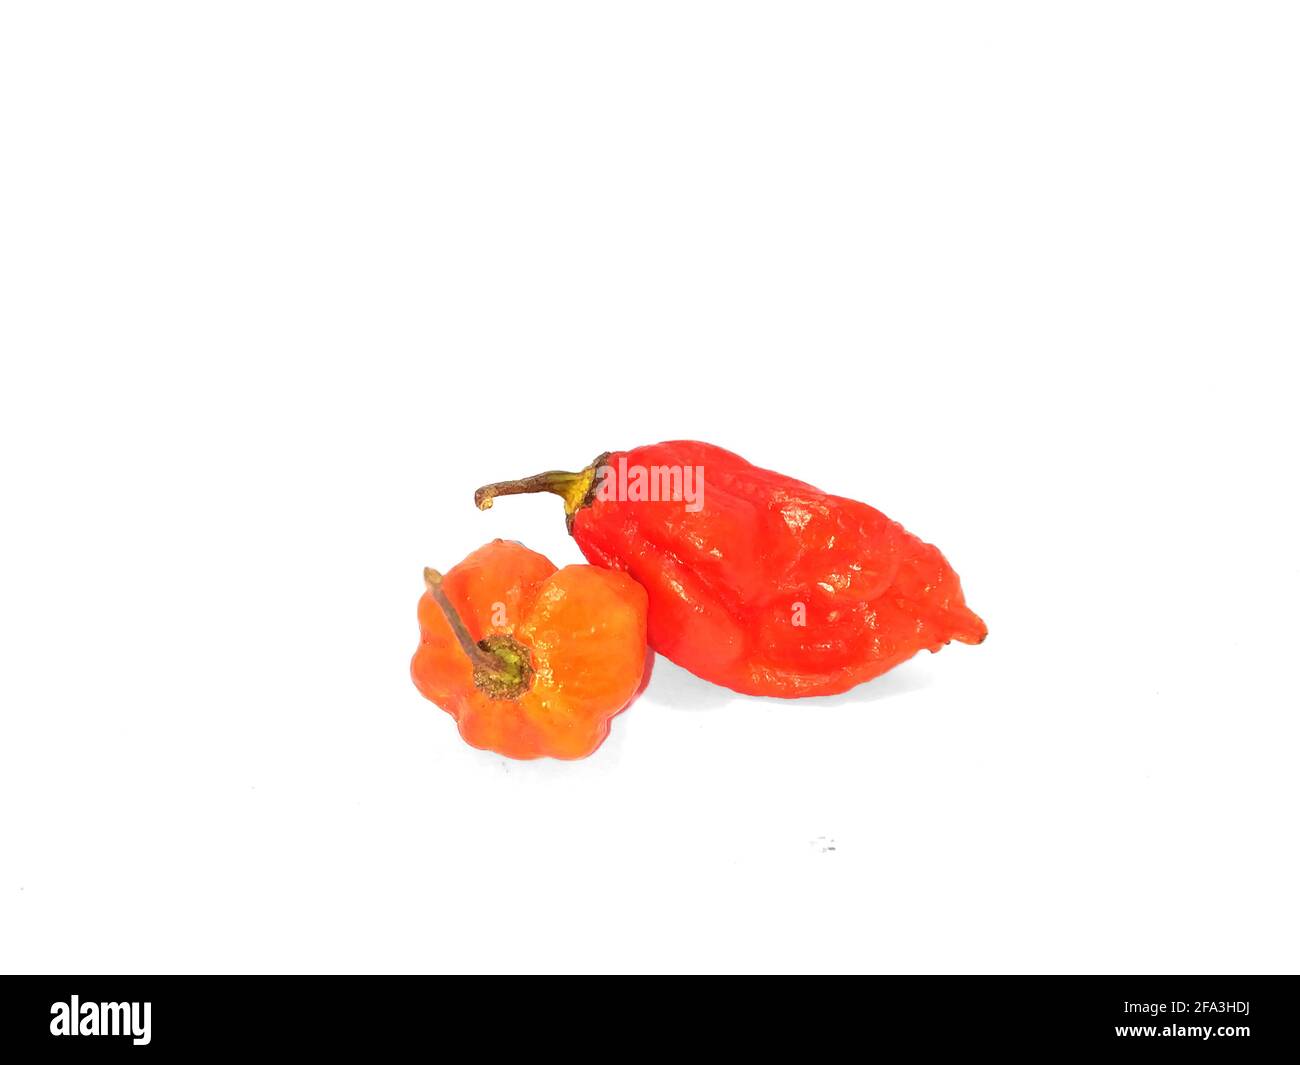 bhut jolokia ghost pepper isolated on white background. ghost pepper page border .bhut jolokia ghost pepper isolated on white background.bhut jolokia . Stock Photo